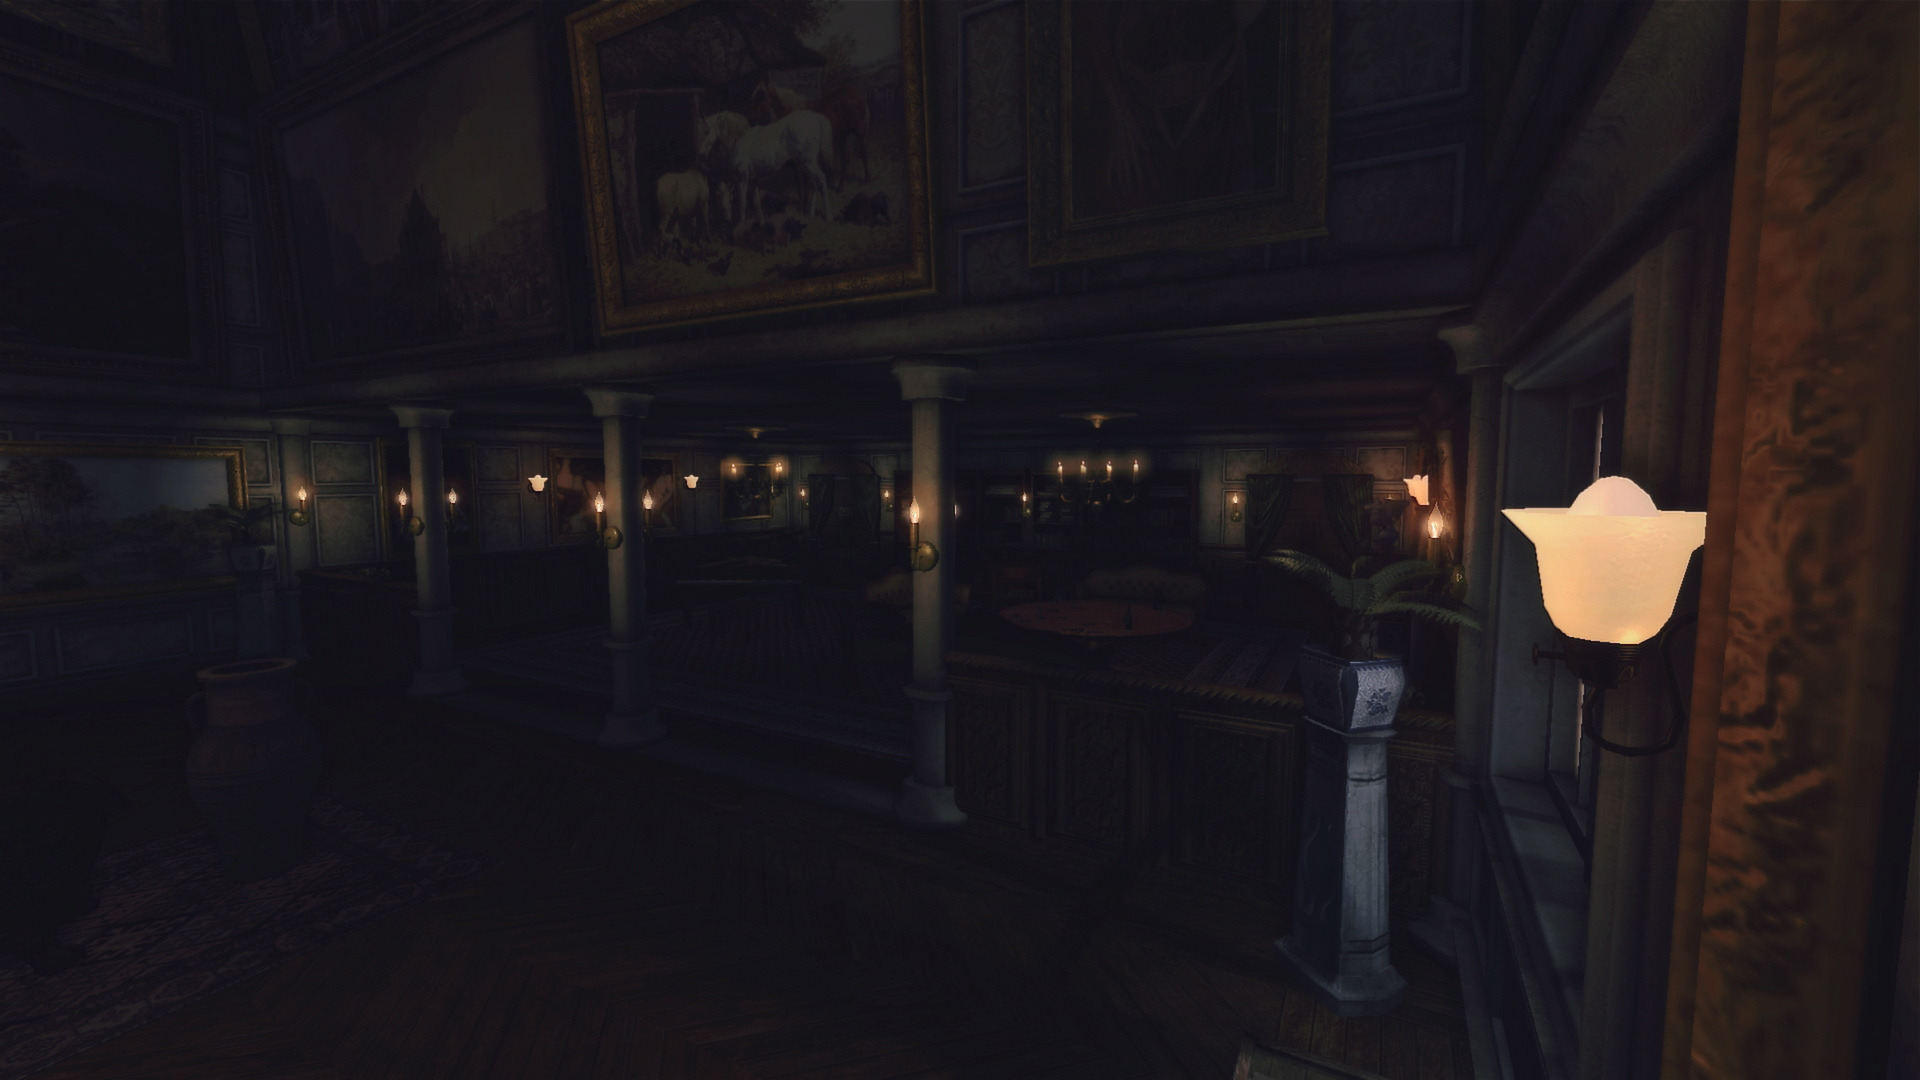 buy amnesia a machine for pigs download free